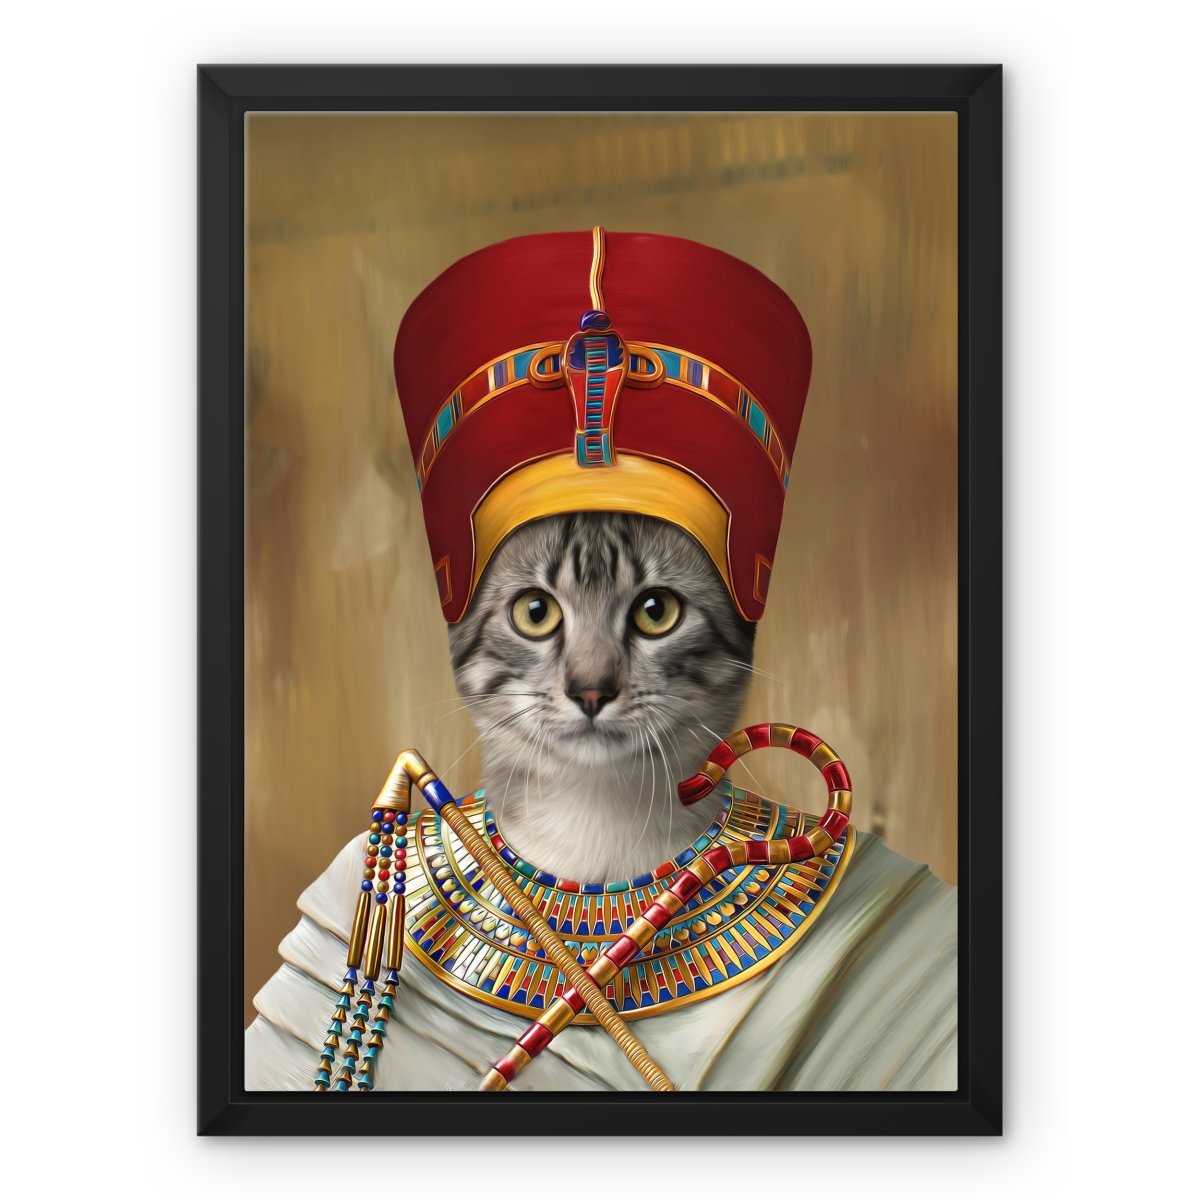 The Egyptian Queen: Custom Pet Canvas - Paw & Glory - #pet portraits# - #dog portraits# - #pet portraits uk#paw & glory, pet portraits canvas,personalized dog canvas art, personalised pet canvas uk, pets painted on canvas, canvas dog portrait birthday gift pet portrait